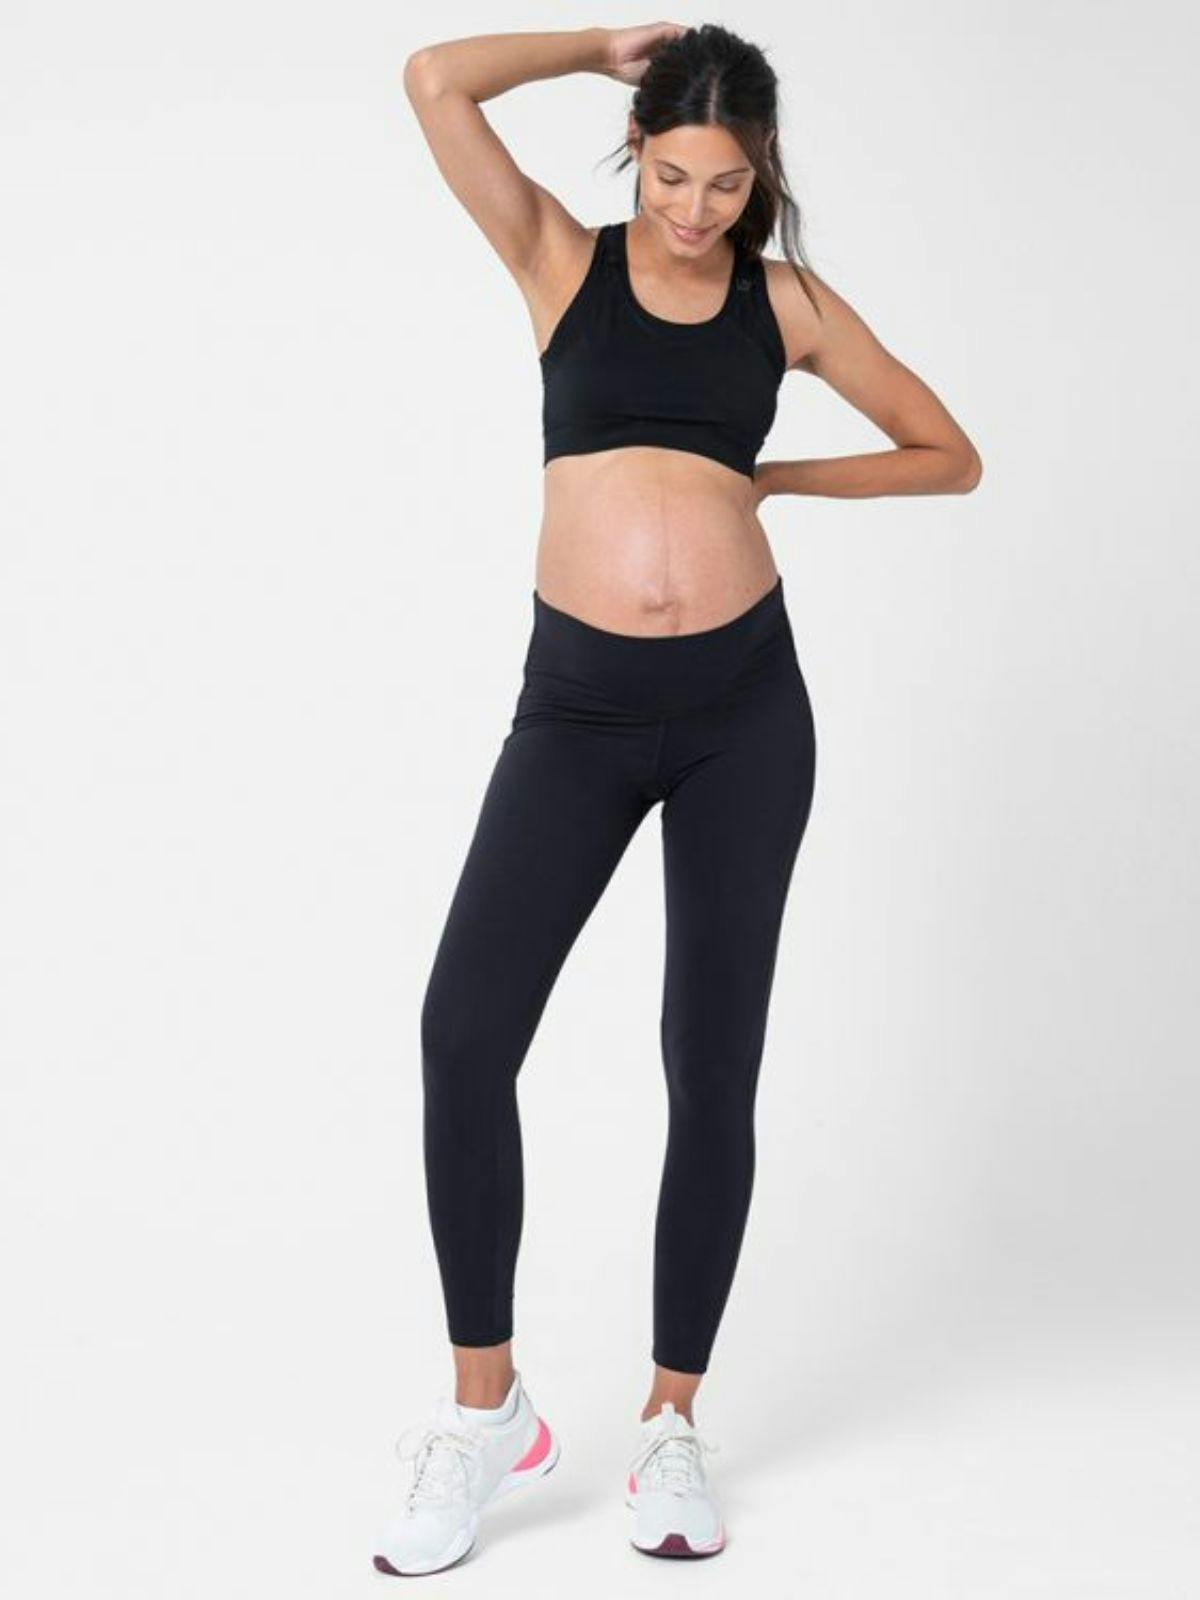 Best maternity leggings to see you through your pregnancy in comfort |  Evening Standard